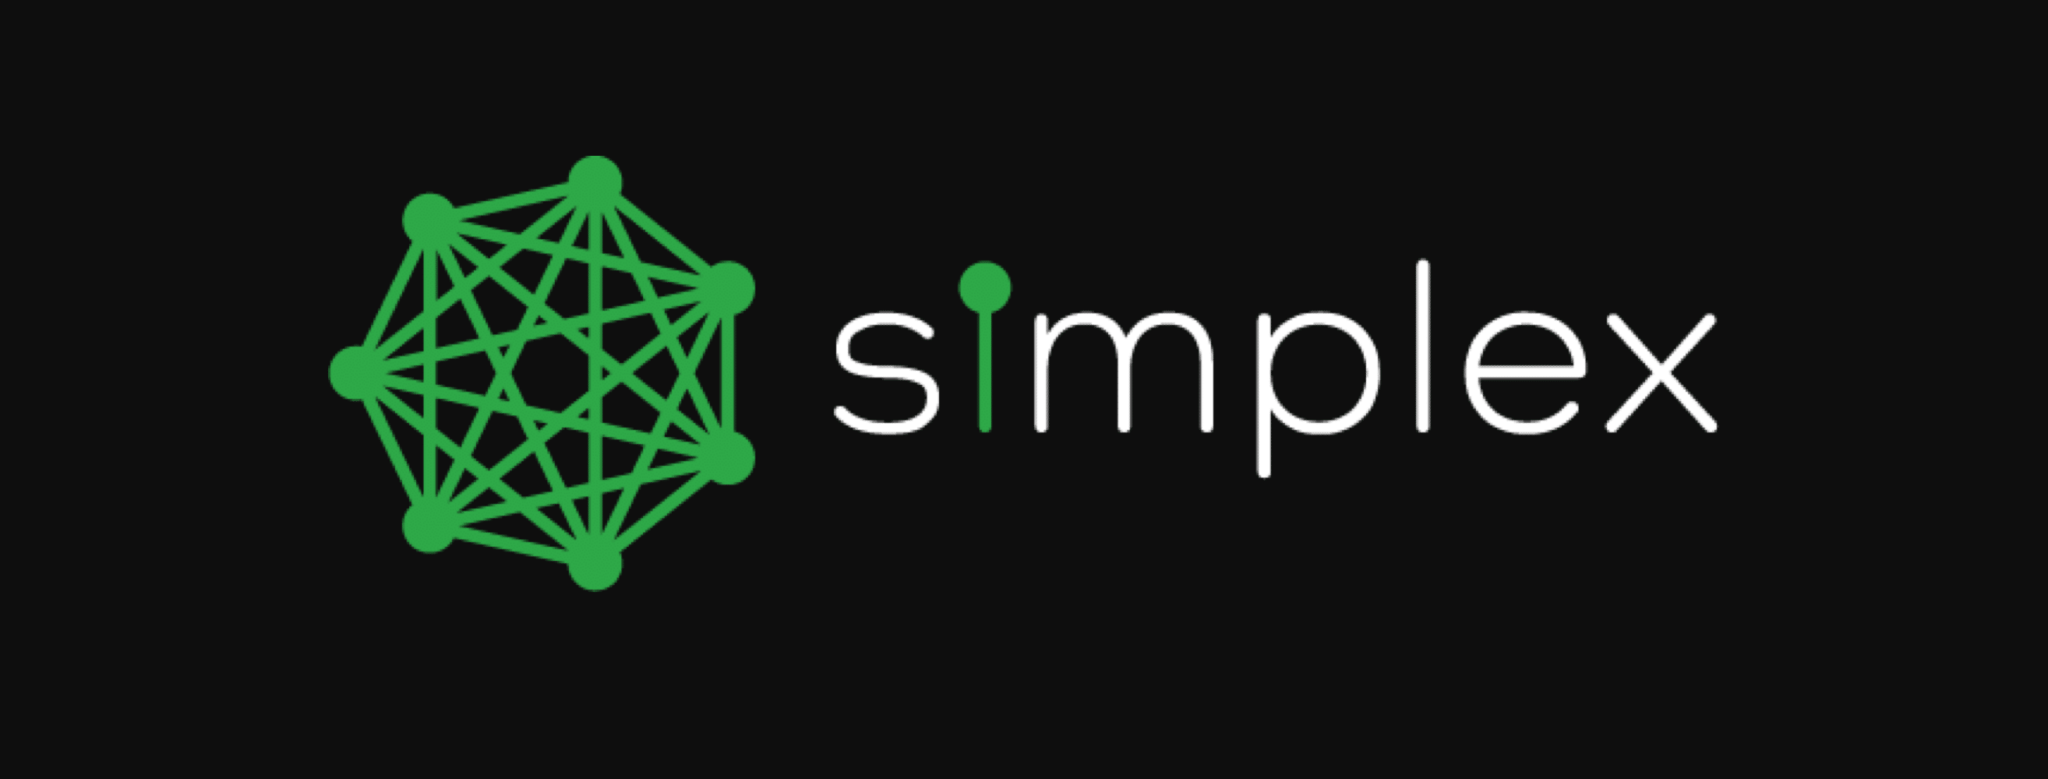 Coinbase vs Simplex: Features, Fees & More ()